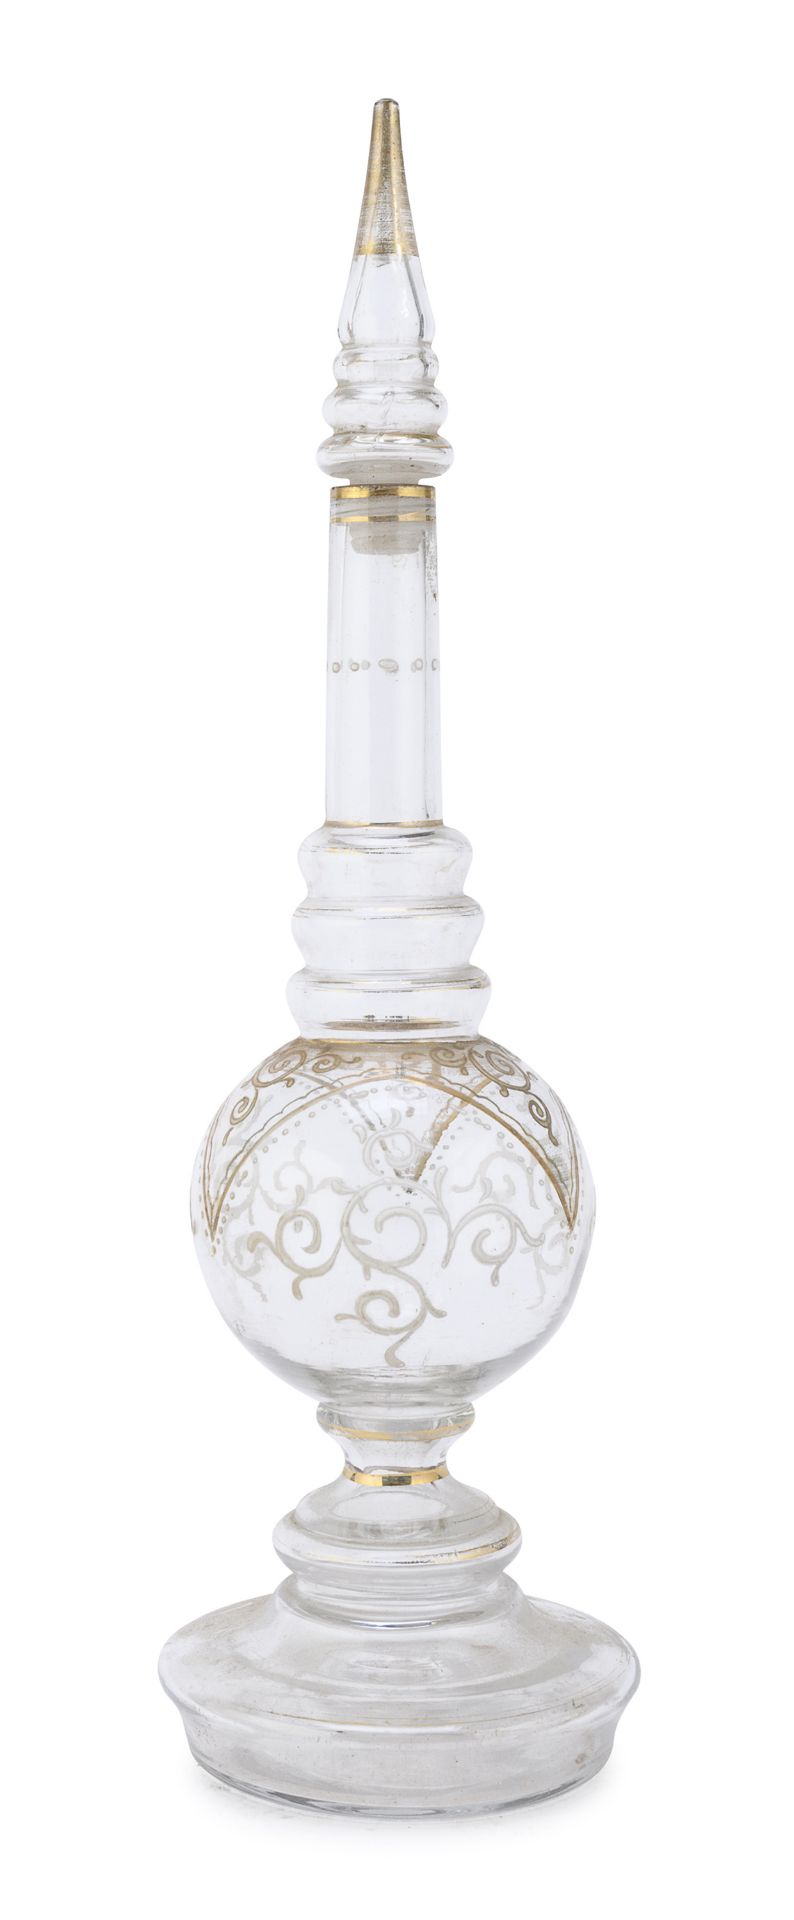 BLOWN GLASS AMPOULE EARLY 20TH CENTURY